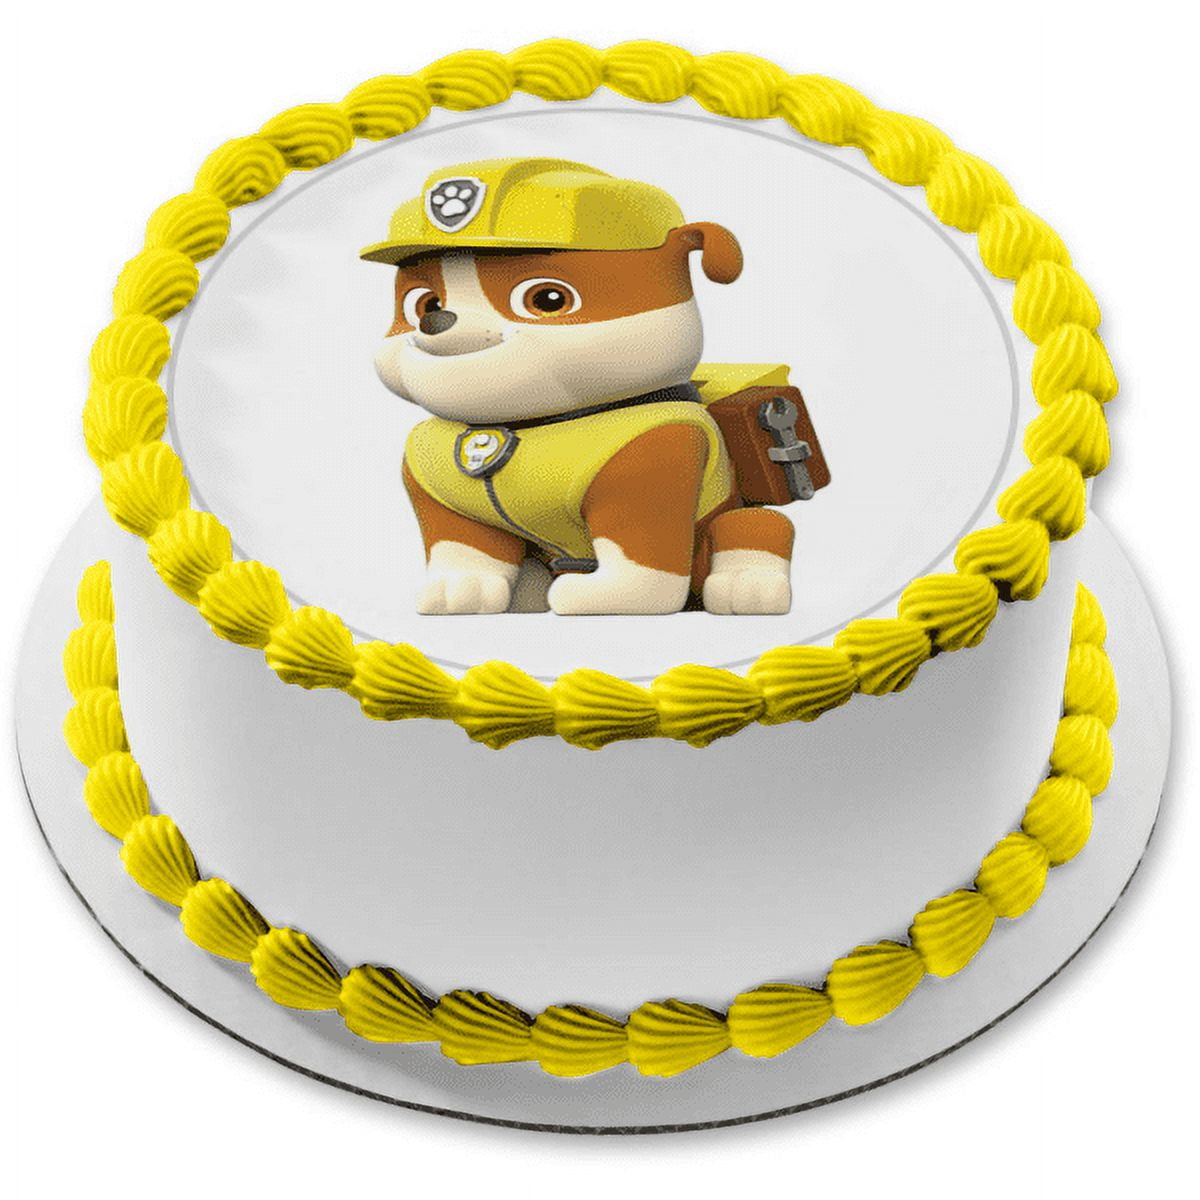 Paw Patrol Rubble Sitting Edible Cake Topper Image ABPID27277 8in Round